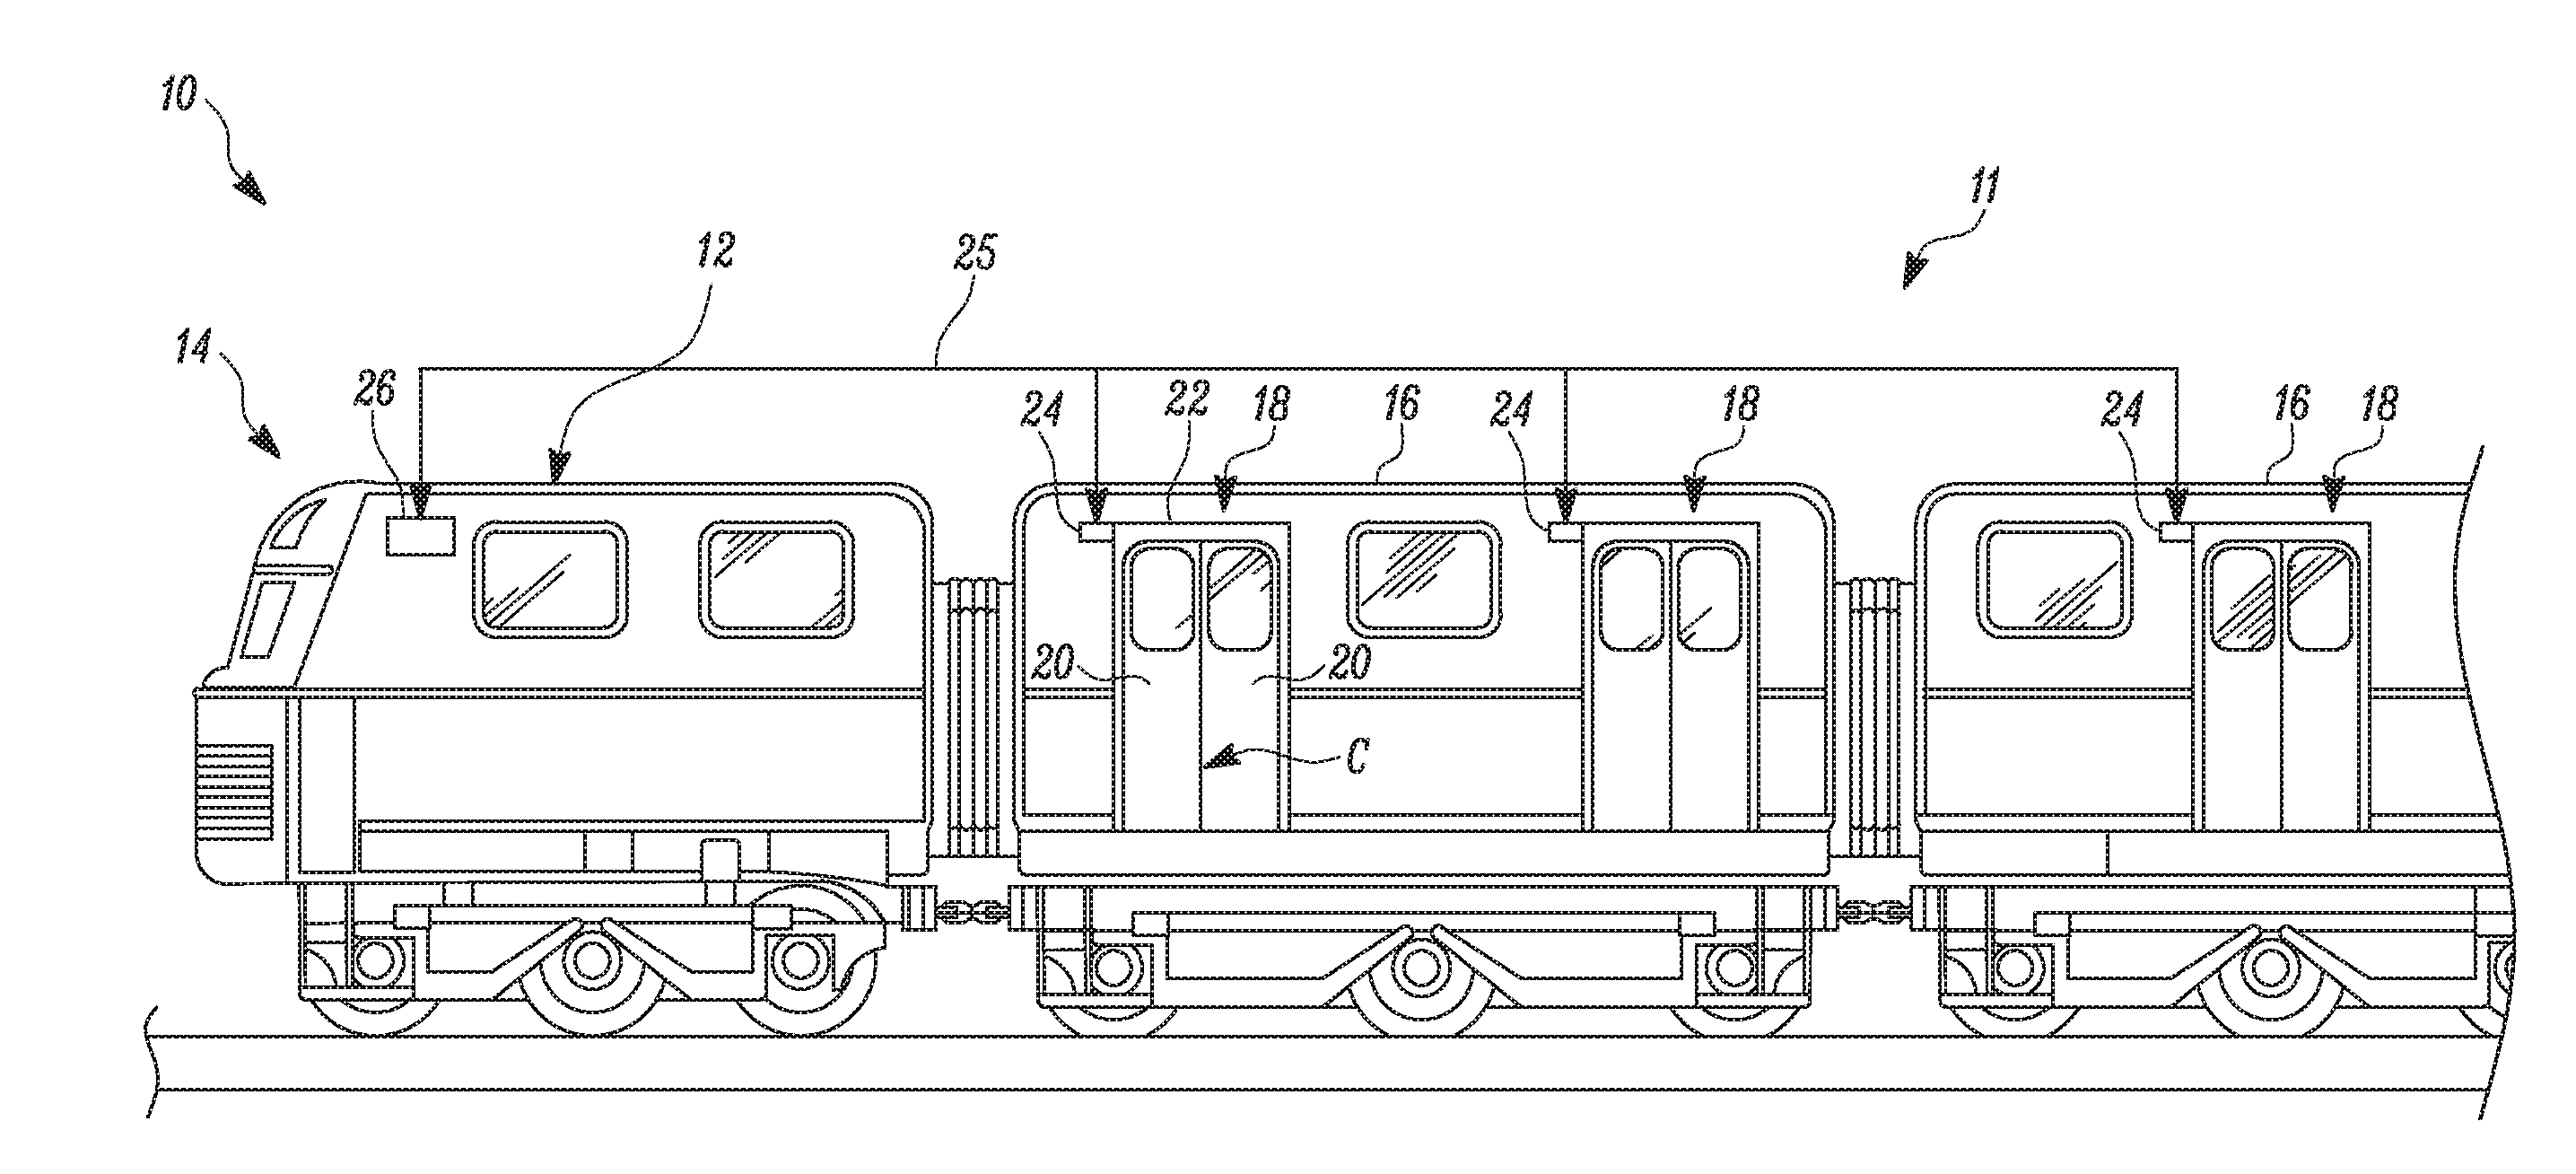 System for controlling movement of passenger train